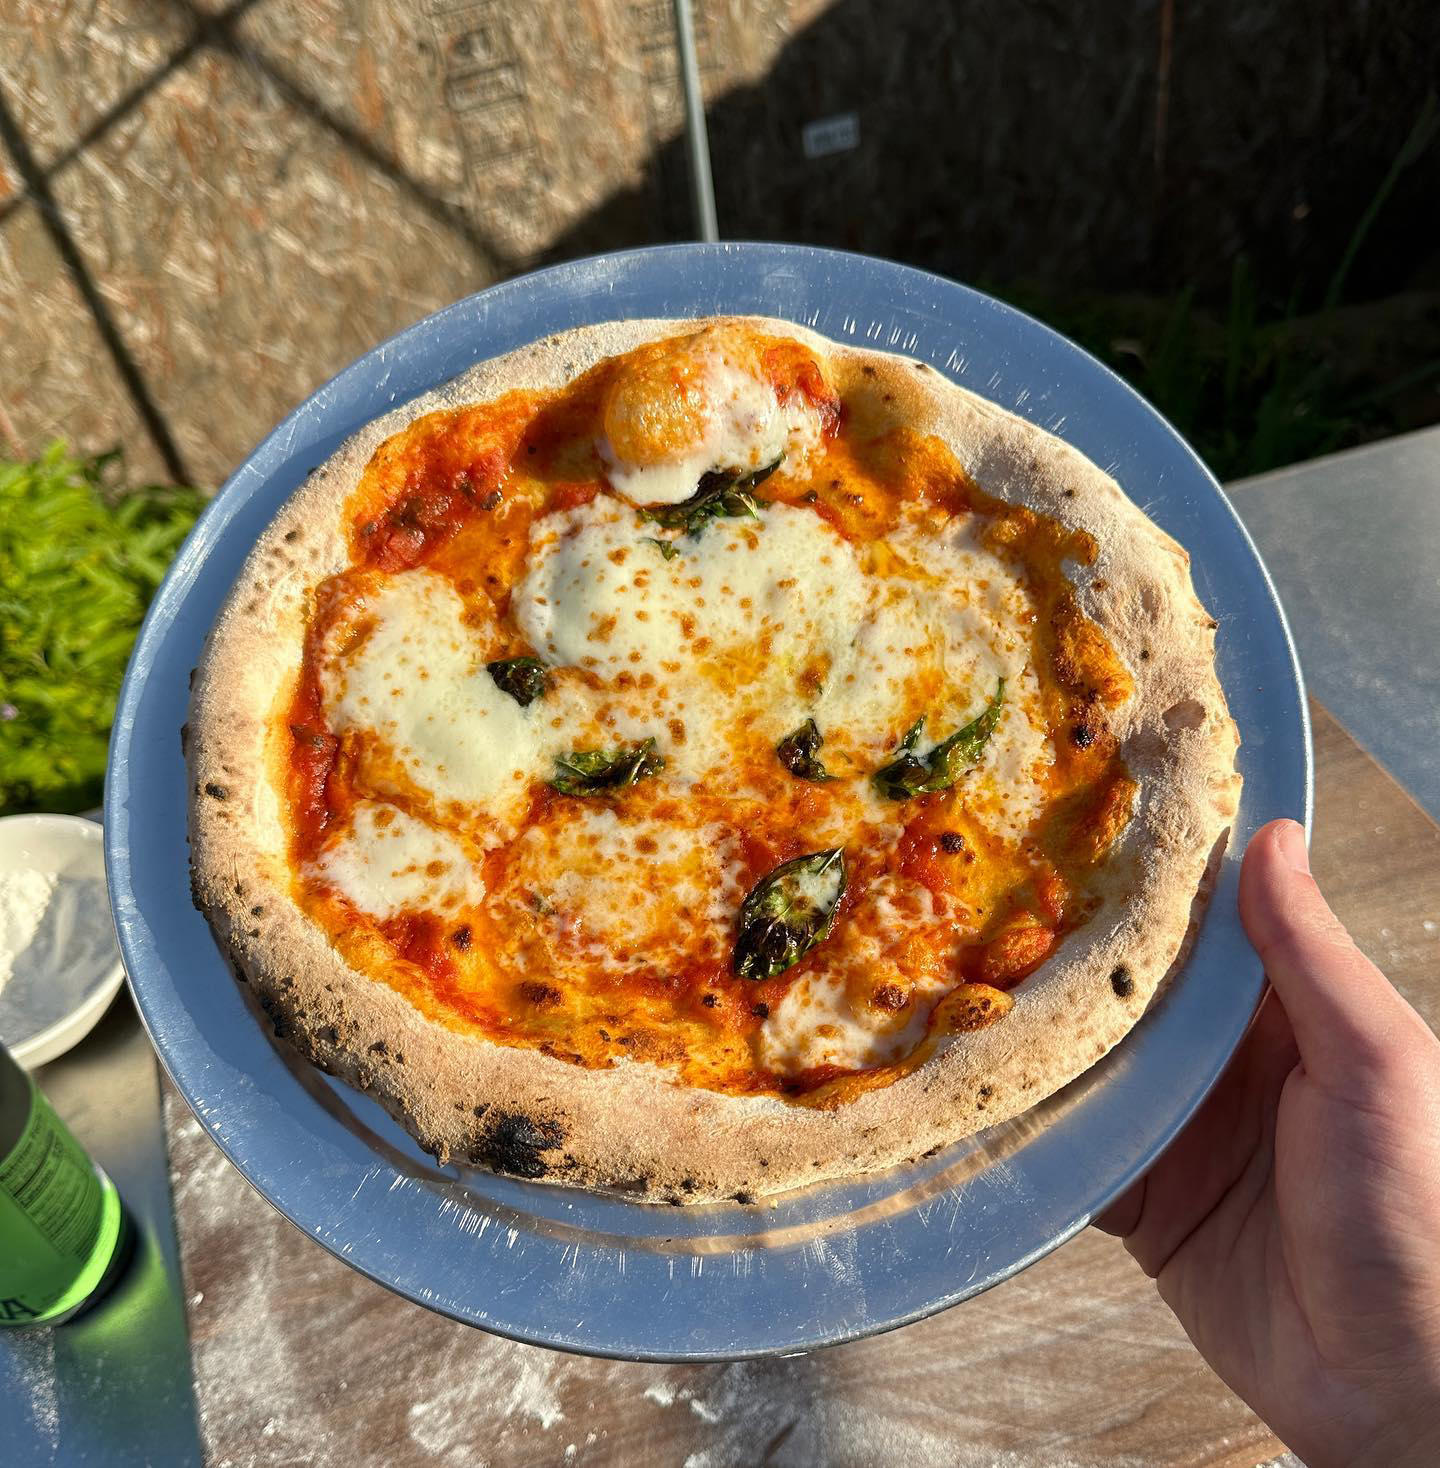 margherita pizza during the golden hour